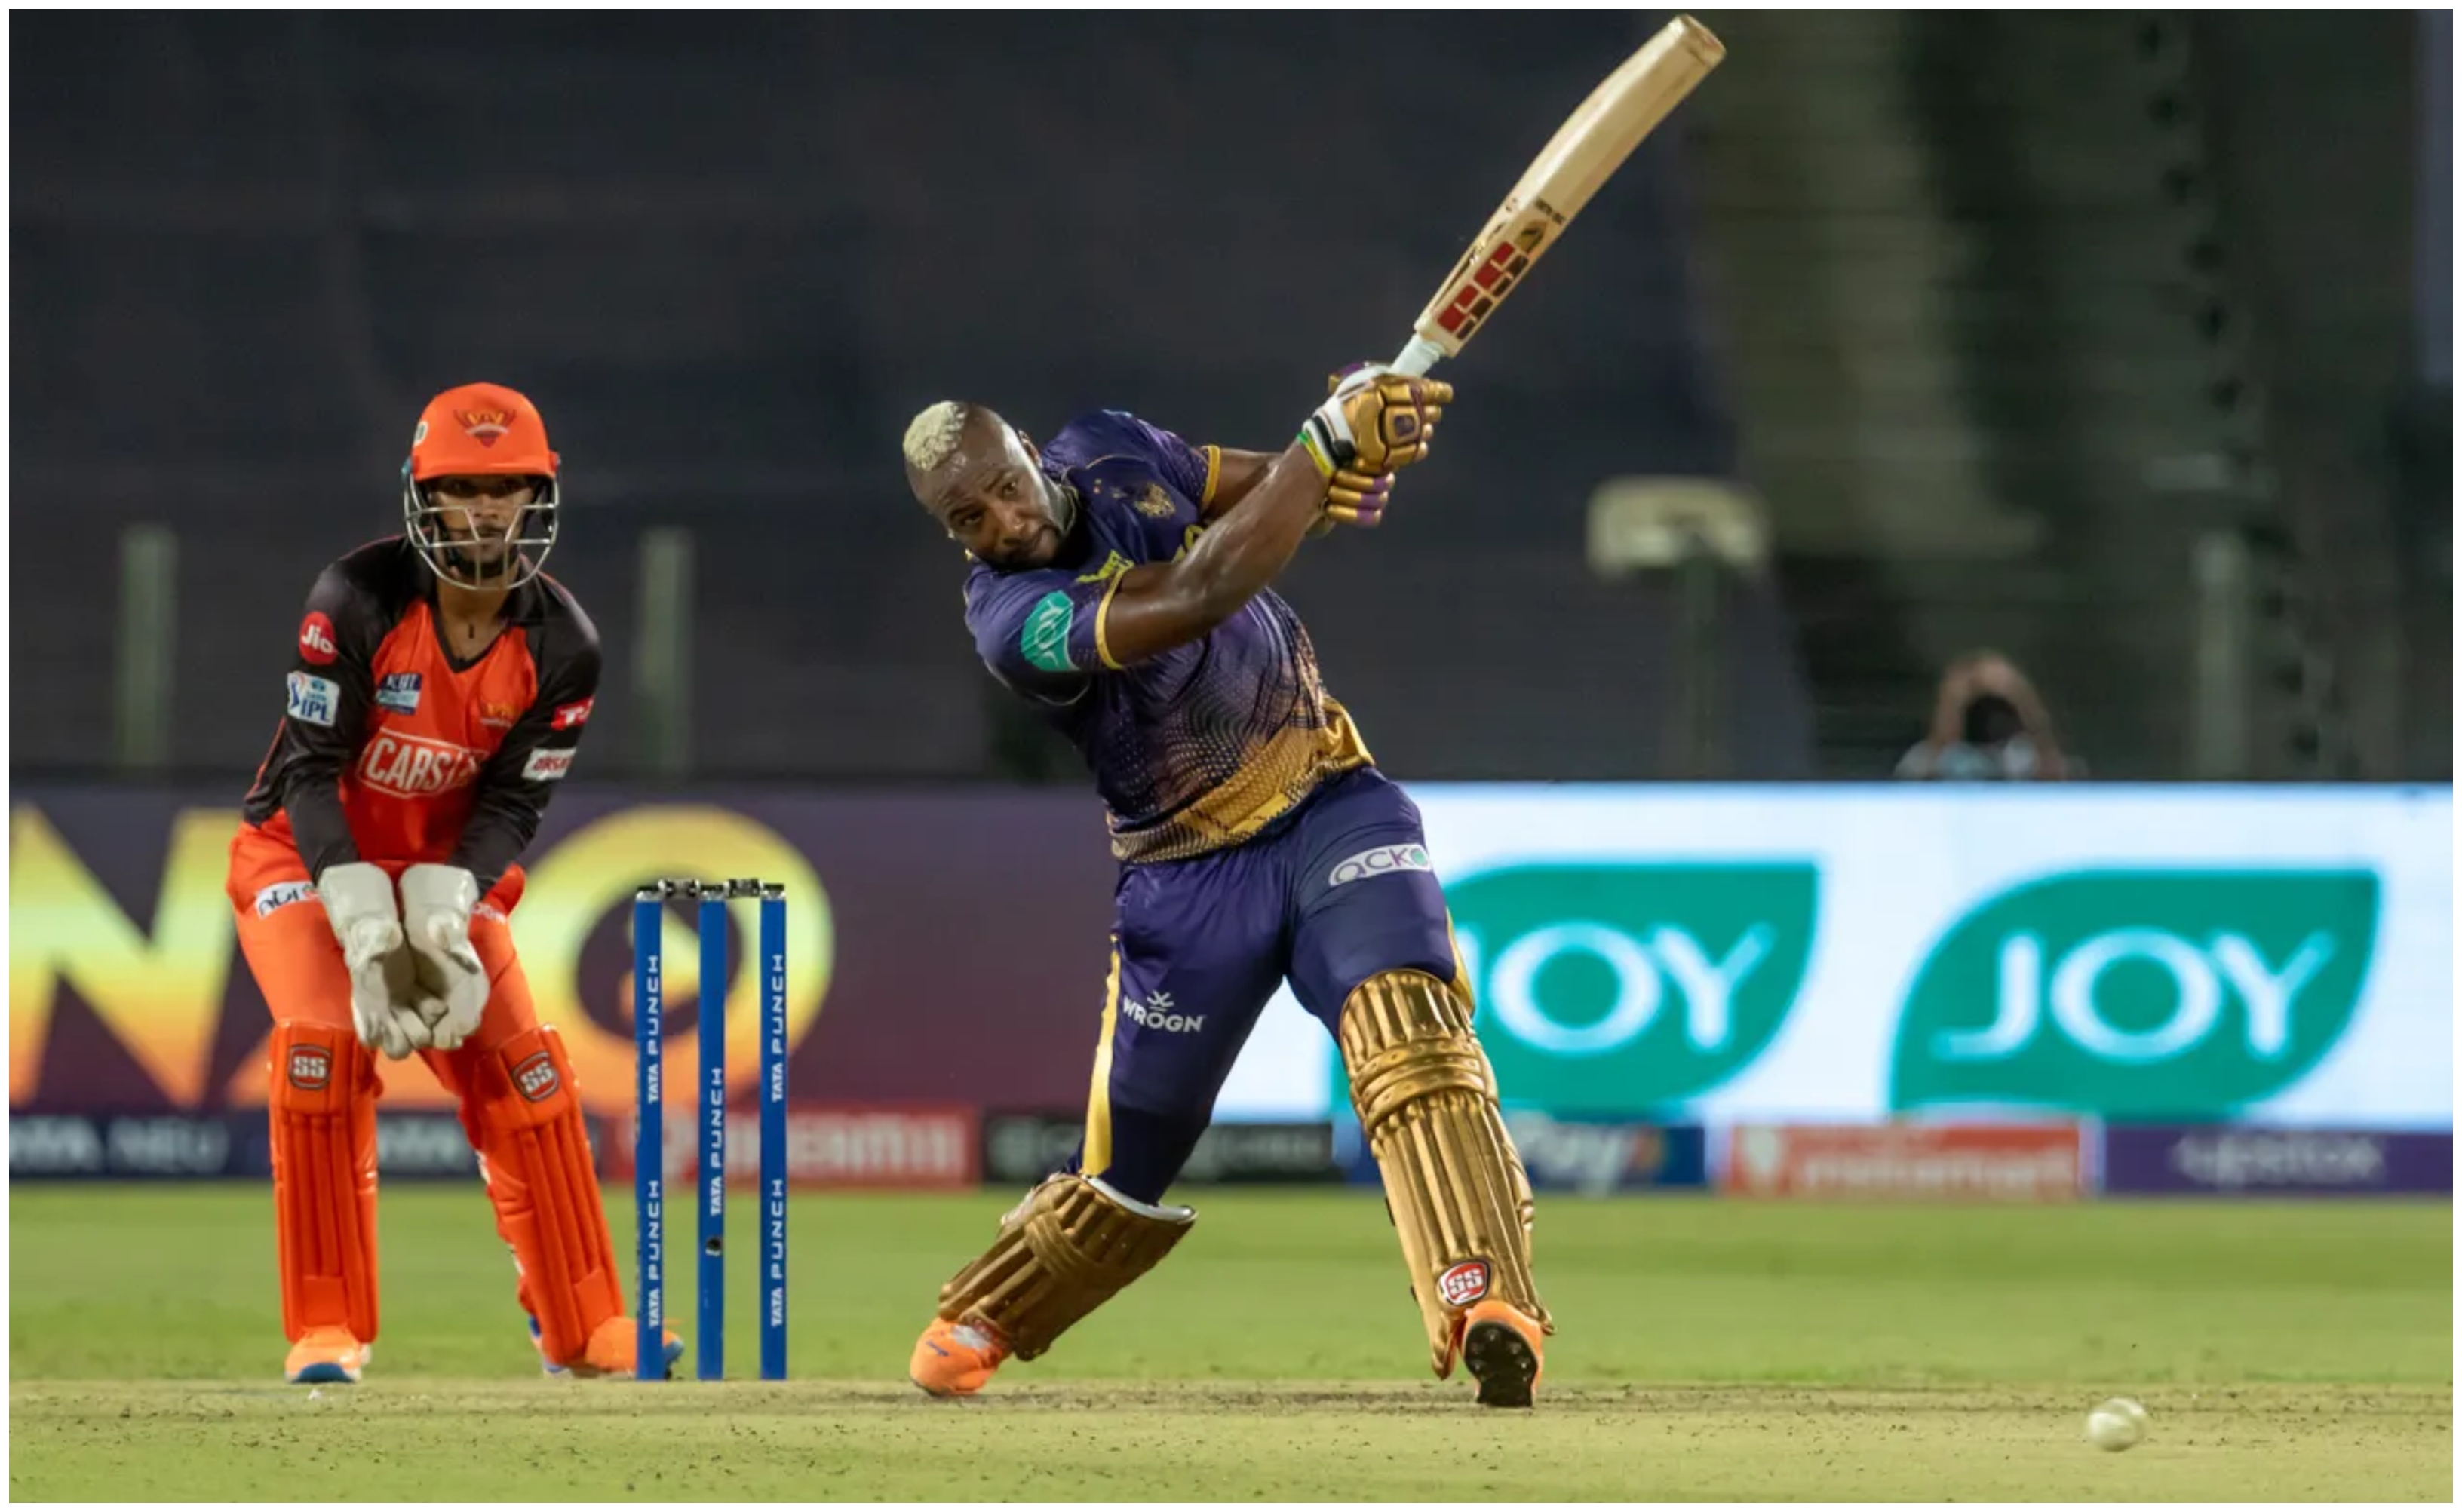 Andre Russell starred in KKR's victory | BCCI/IPL